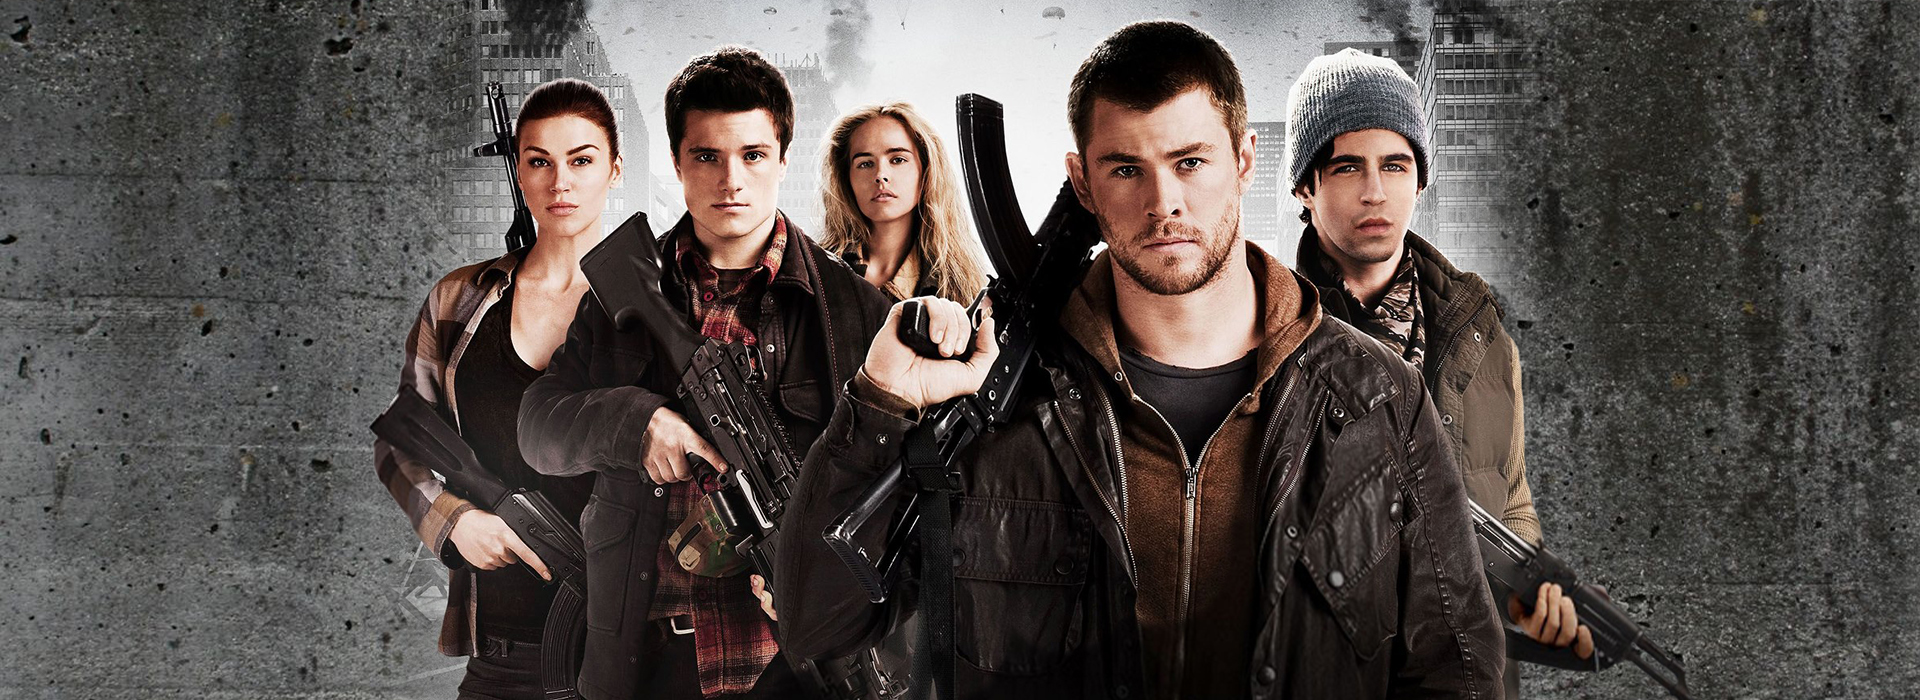 Movie poster Red Dawn